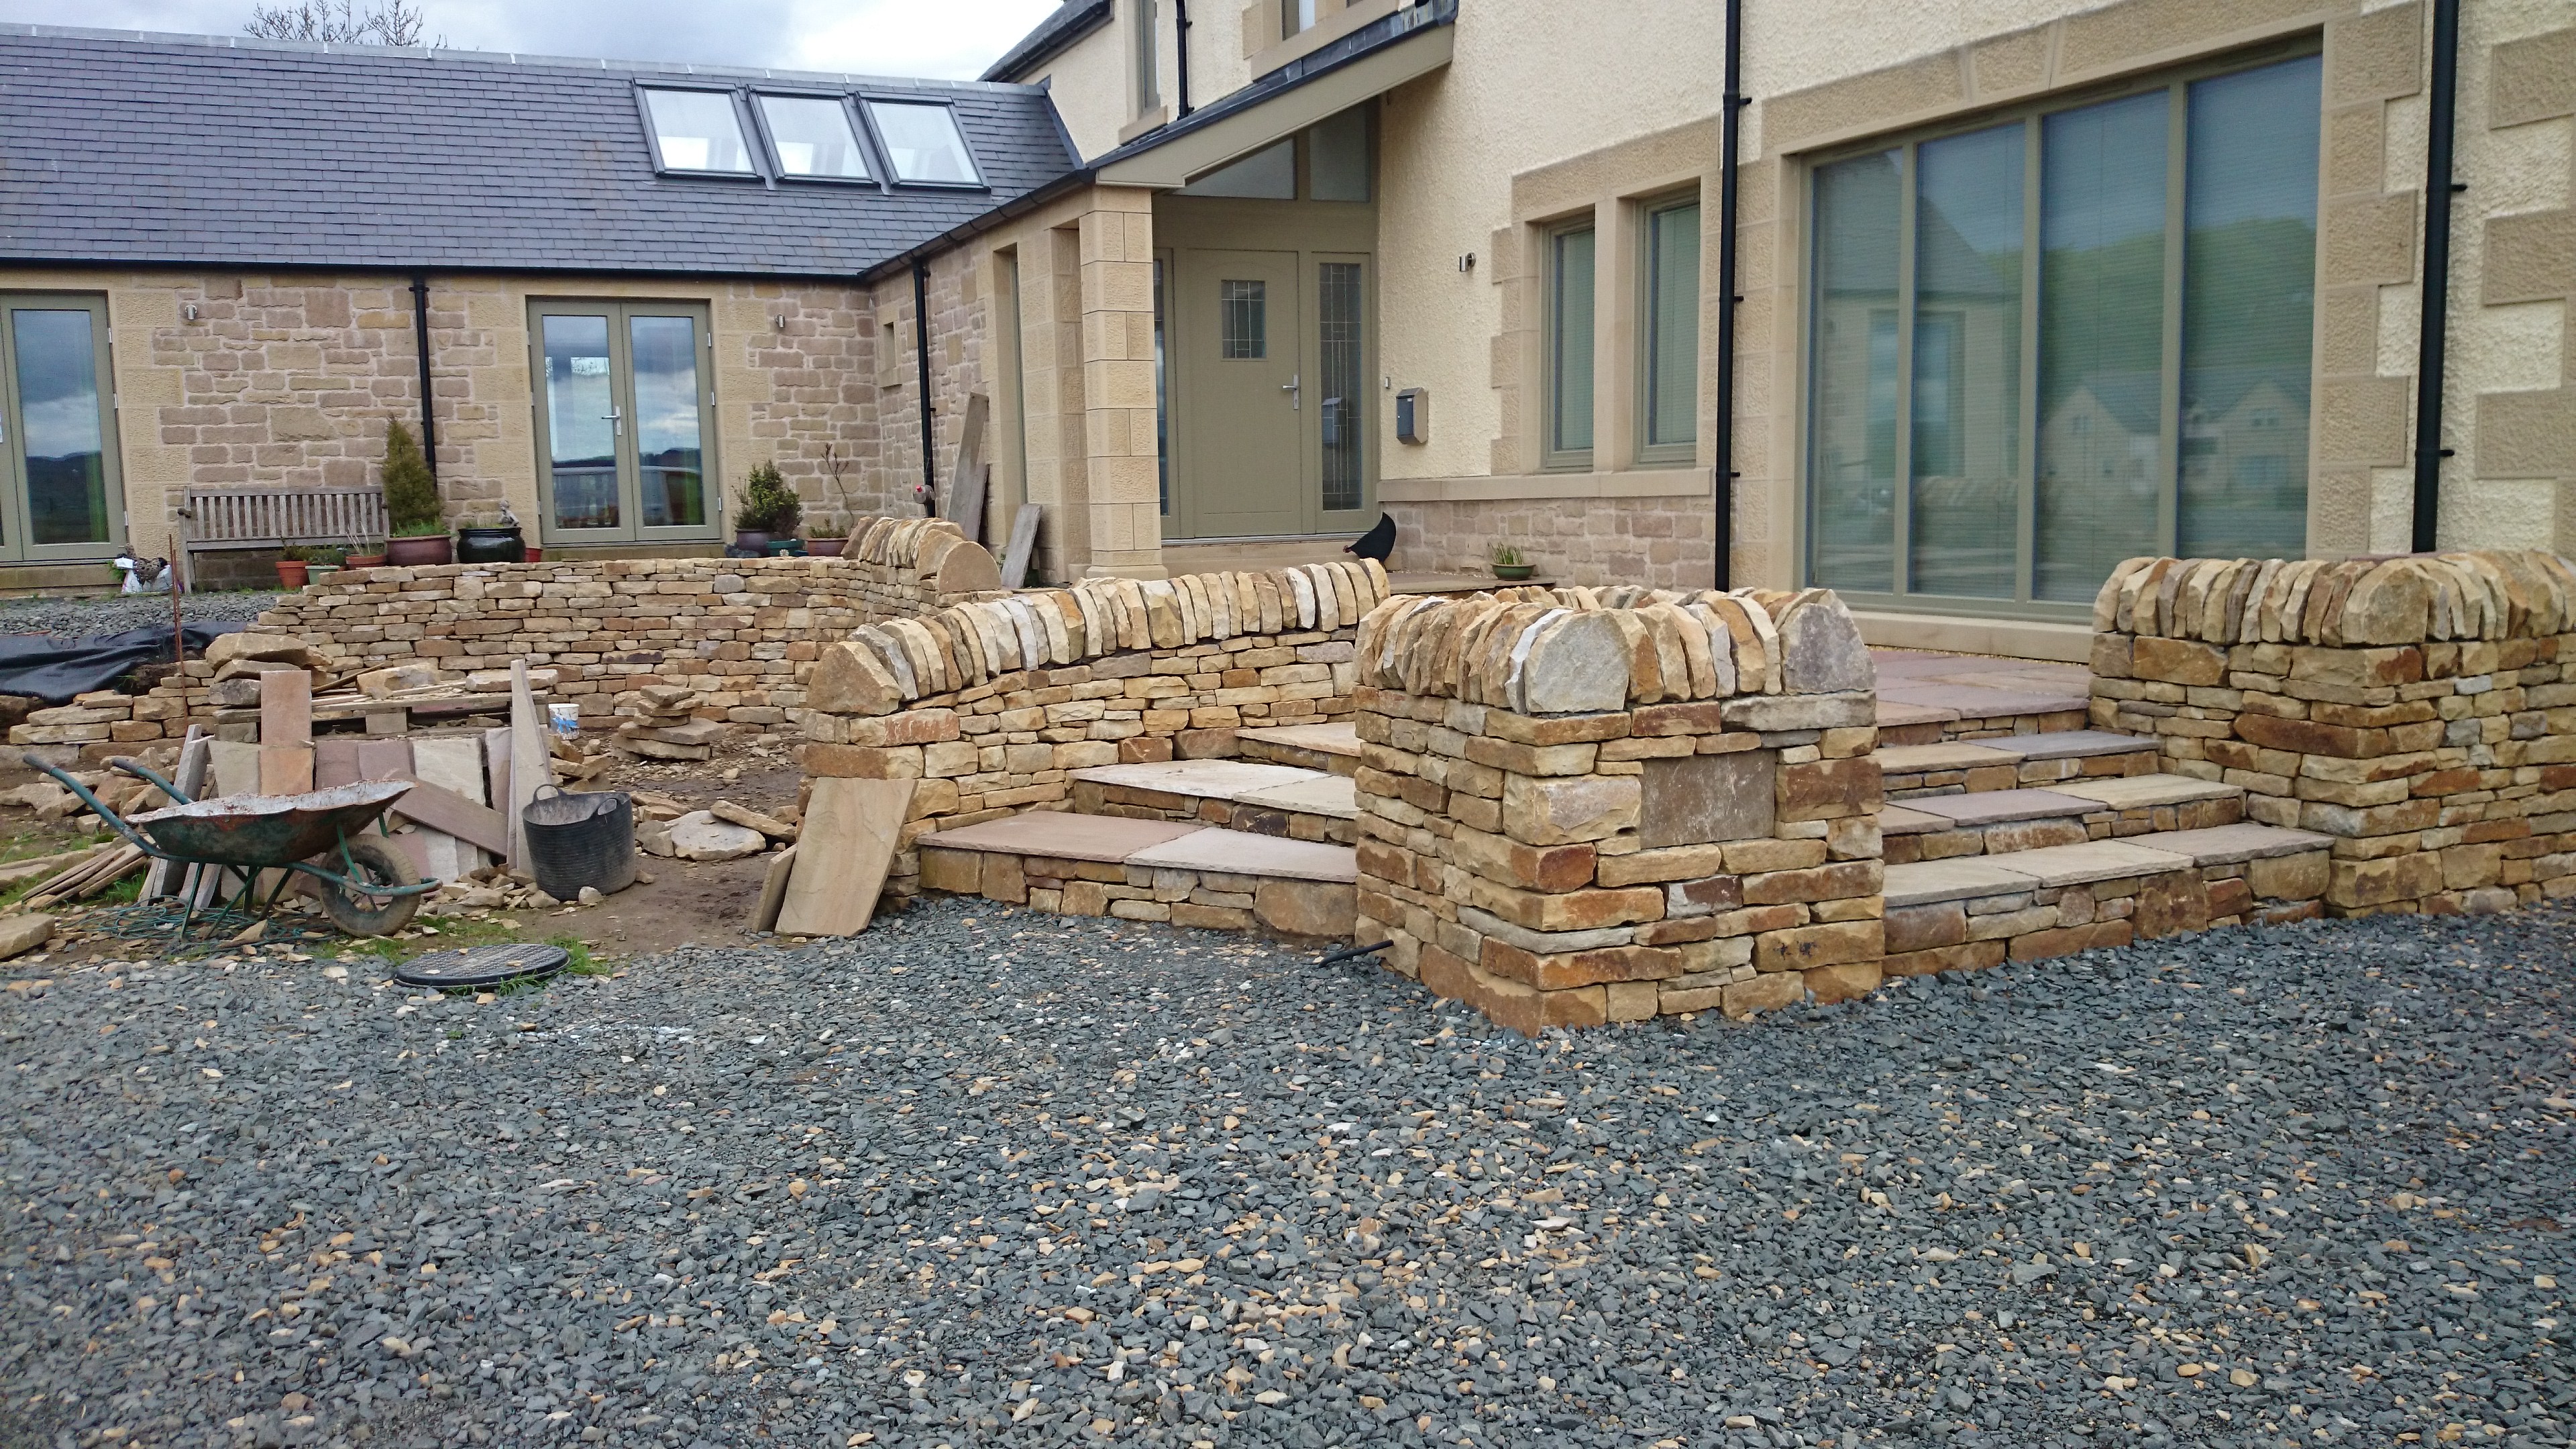 The dry stone wall under construction